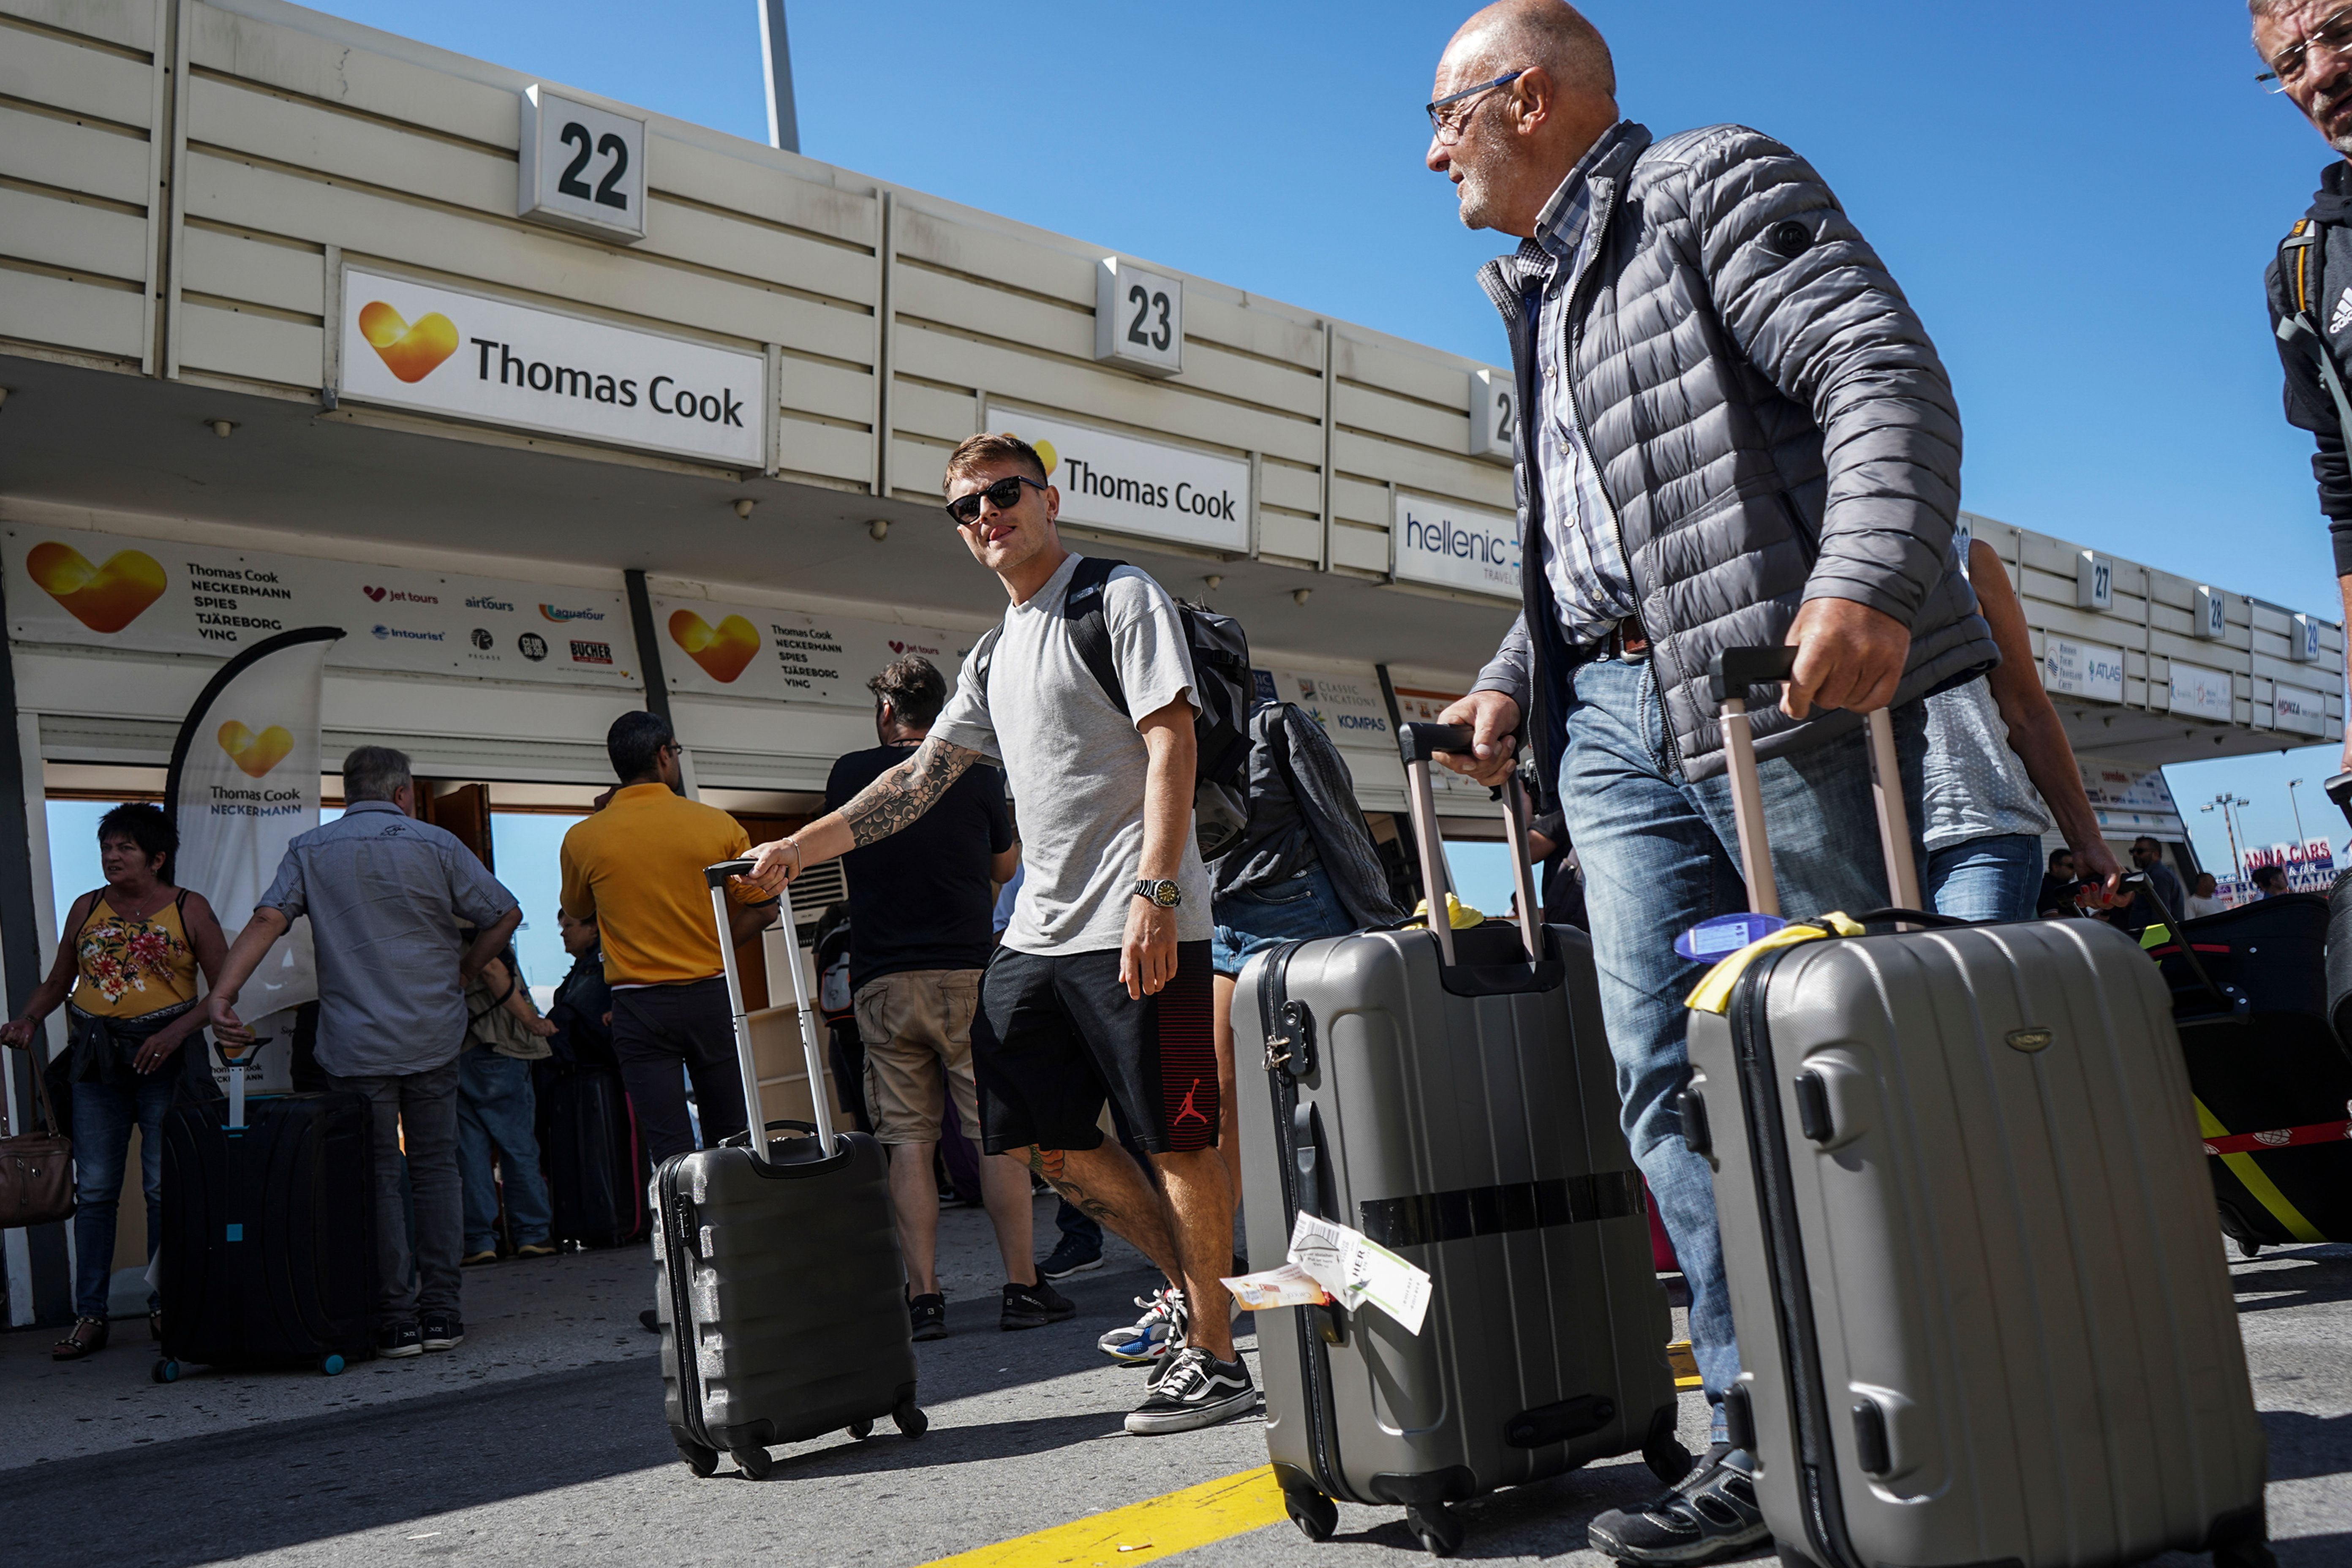 Tourists wait at a Thomas Cook company counter at the Heraklion airport on the island of Crete.